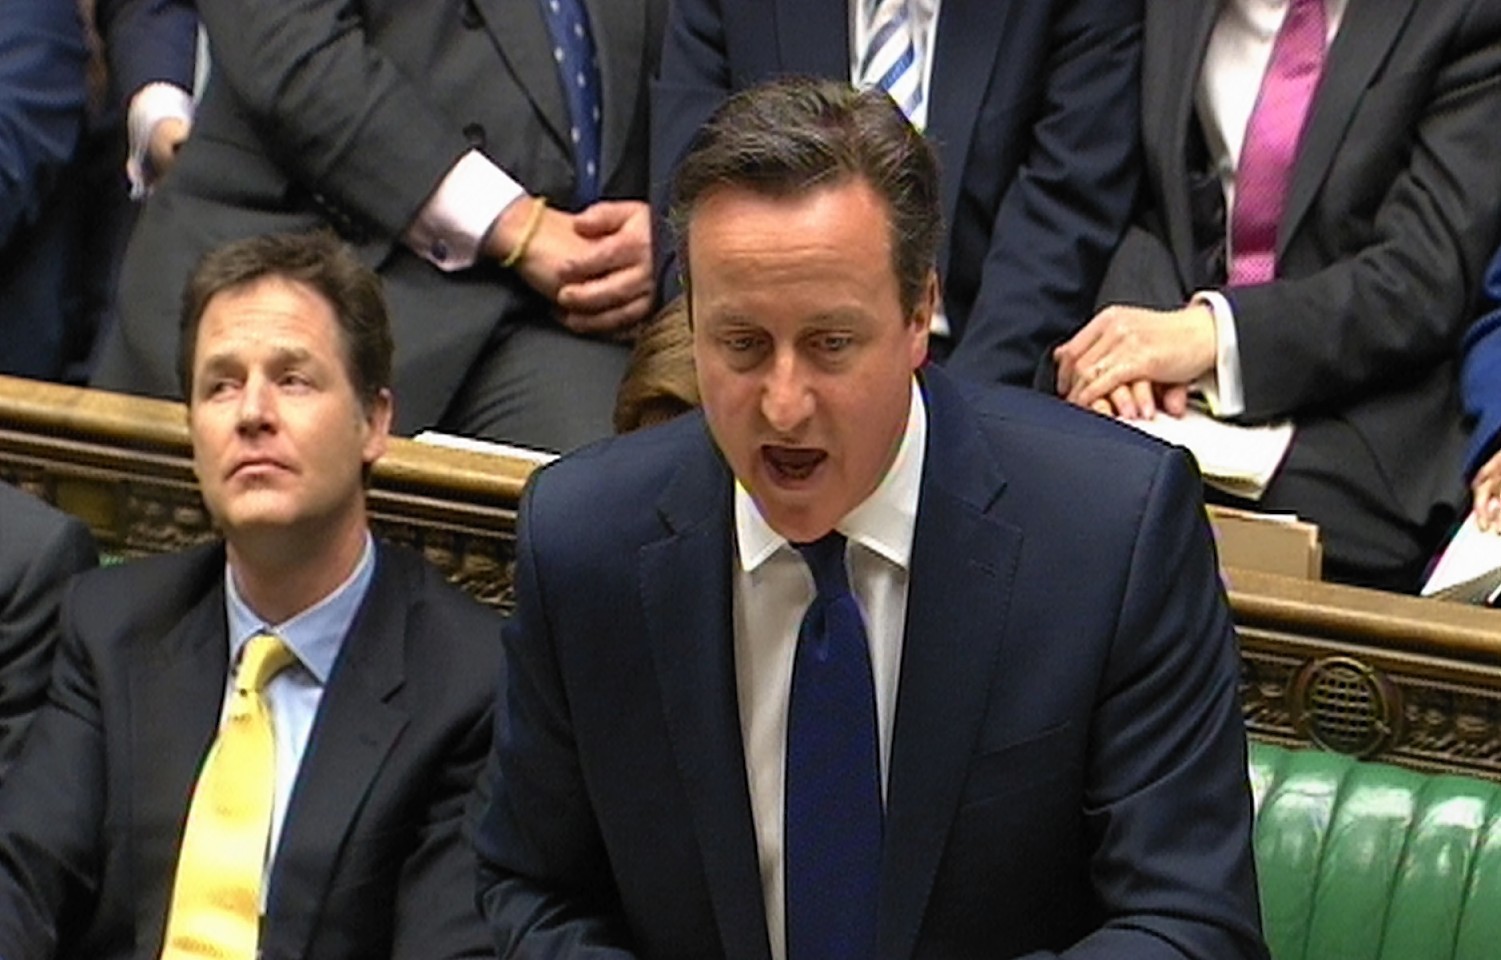 Prime Minister David Cameron speaks during Prime Minister's Questions in the House of Common